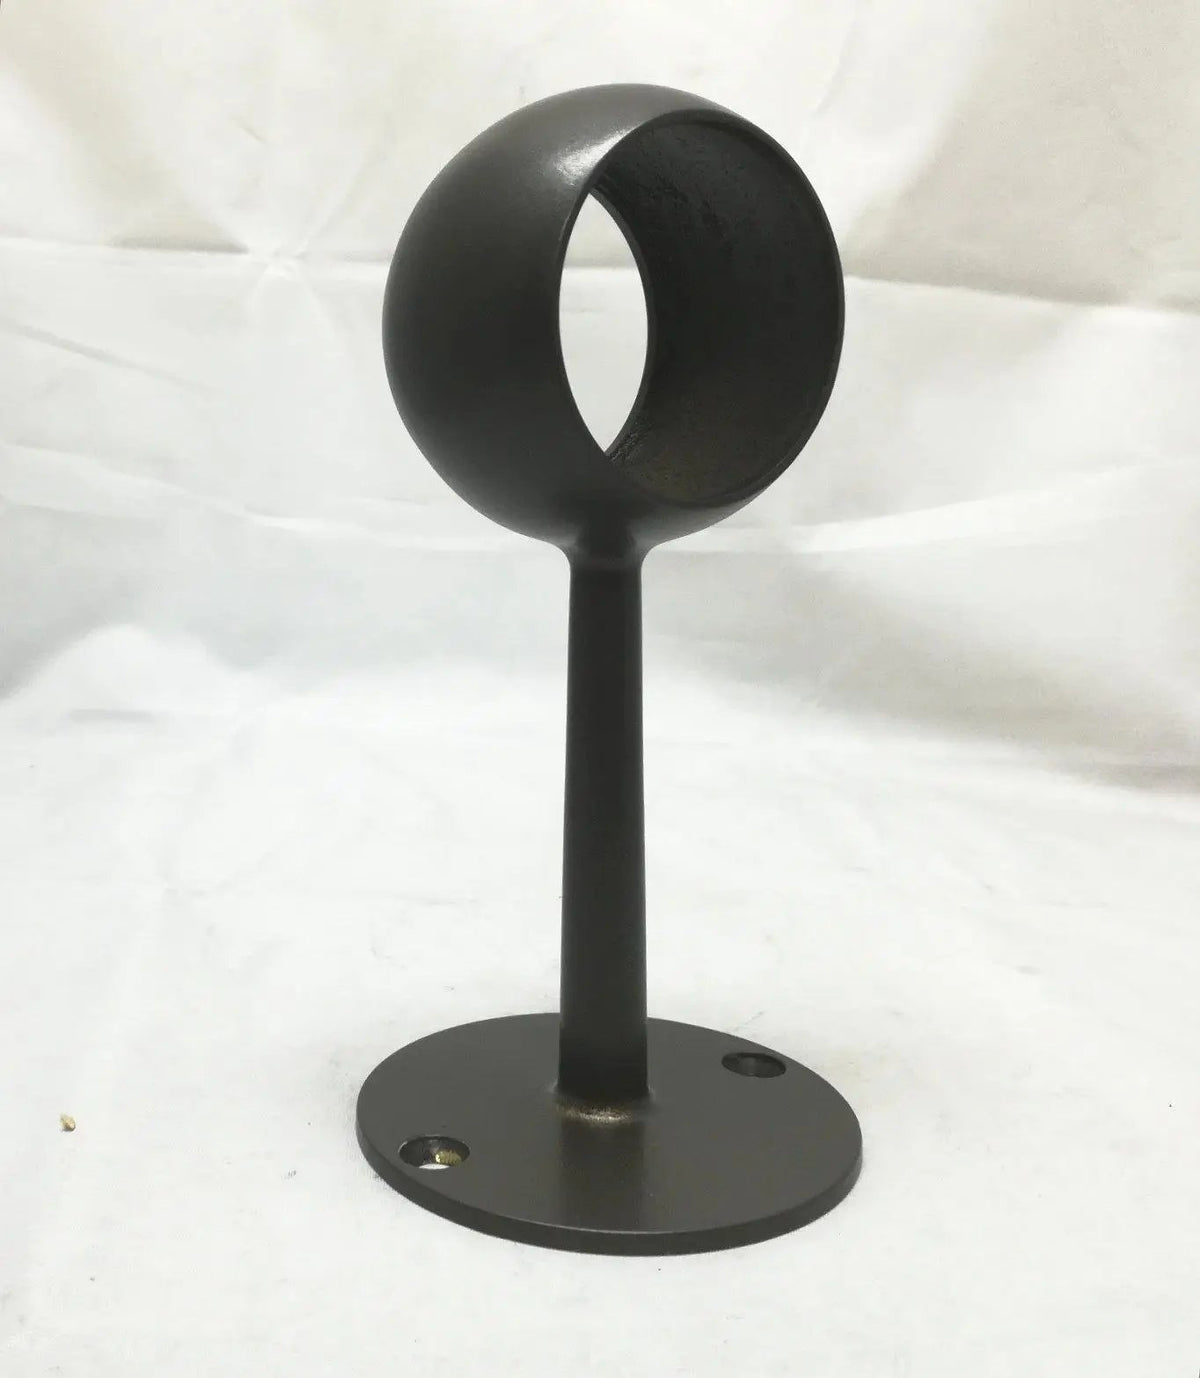 6" Tall Ball Center Post For 2" Tubing - Trade Diversified